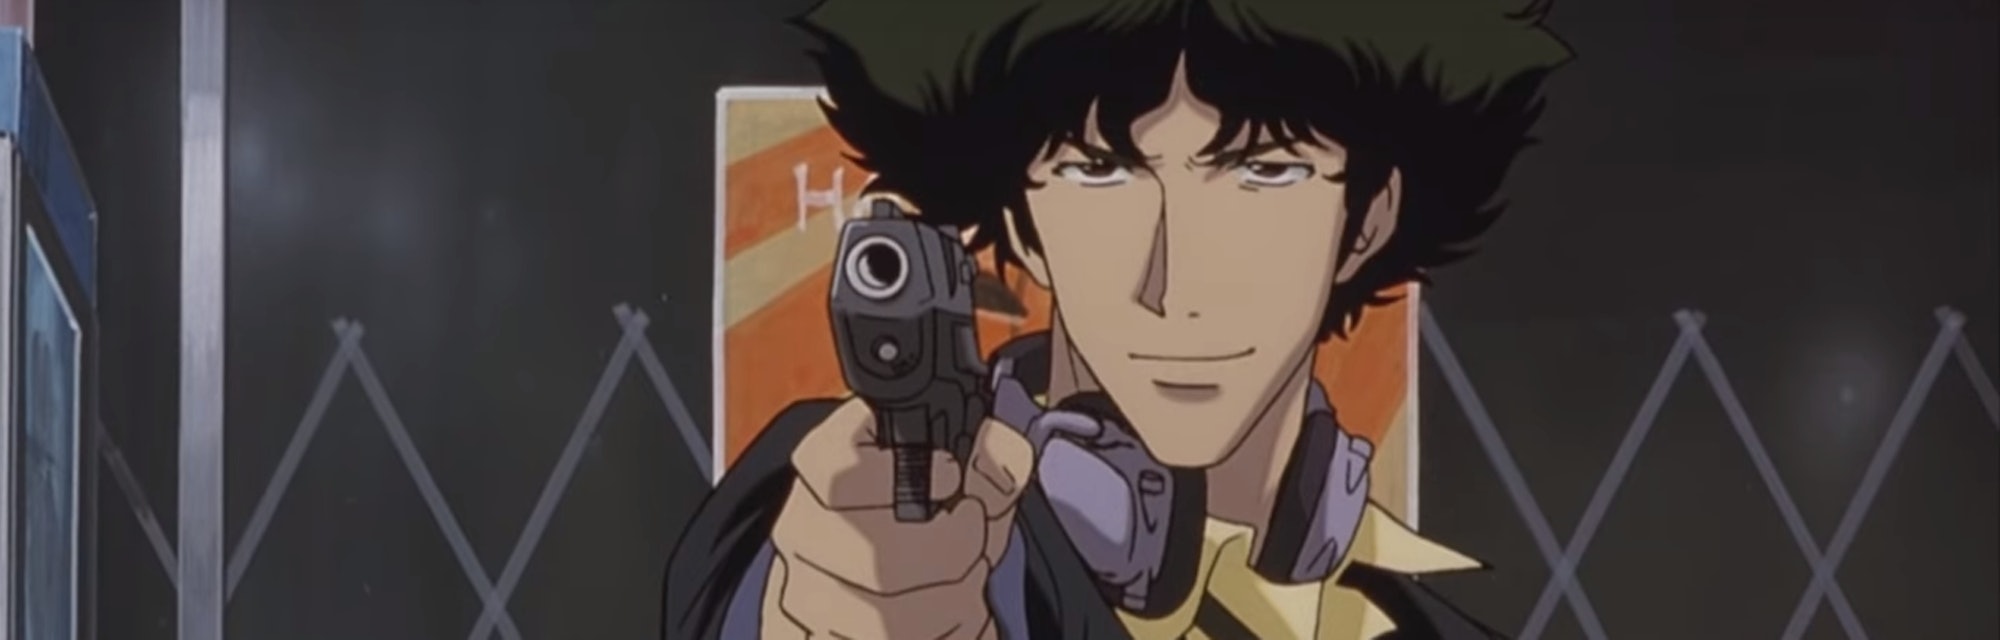 Netflix S Cowboy Bebop Live Action Will Change The Anime In A Big Way